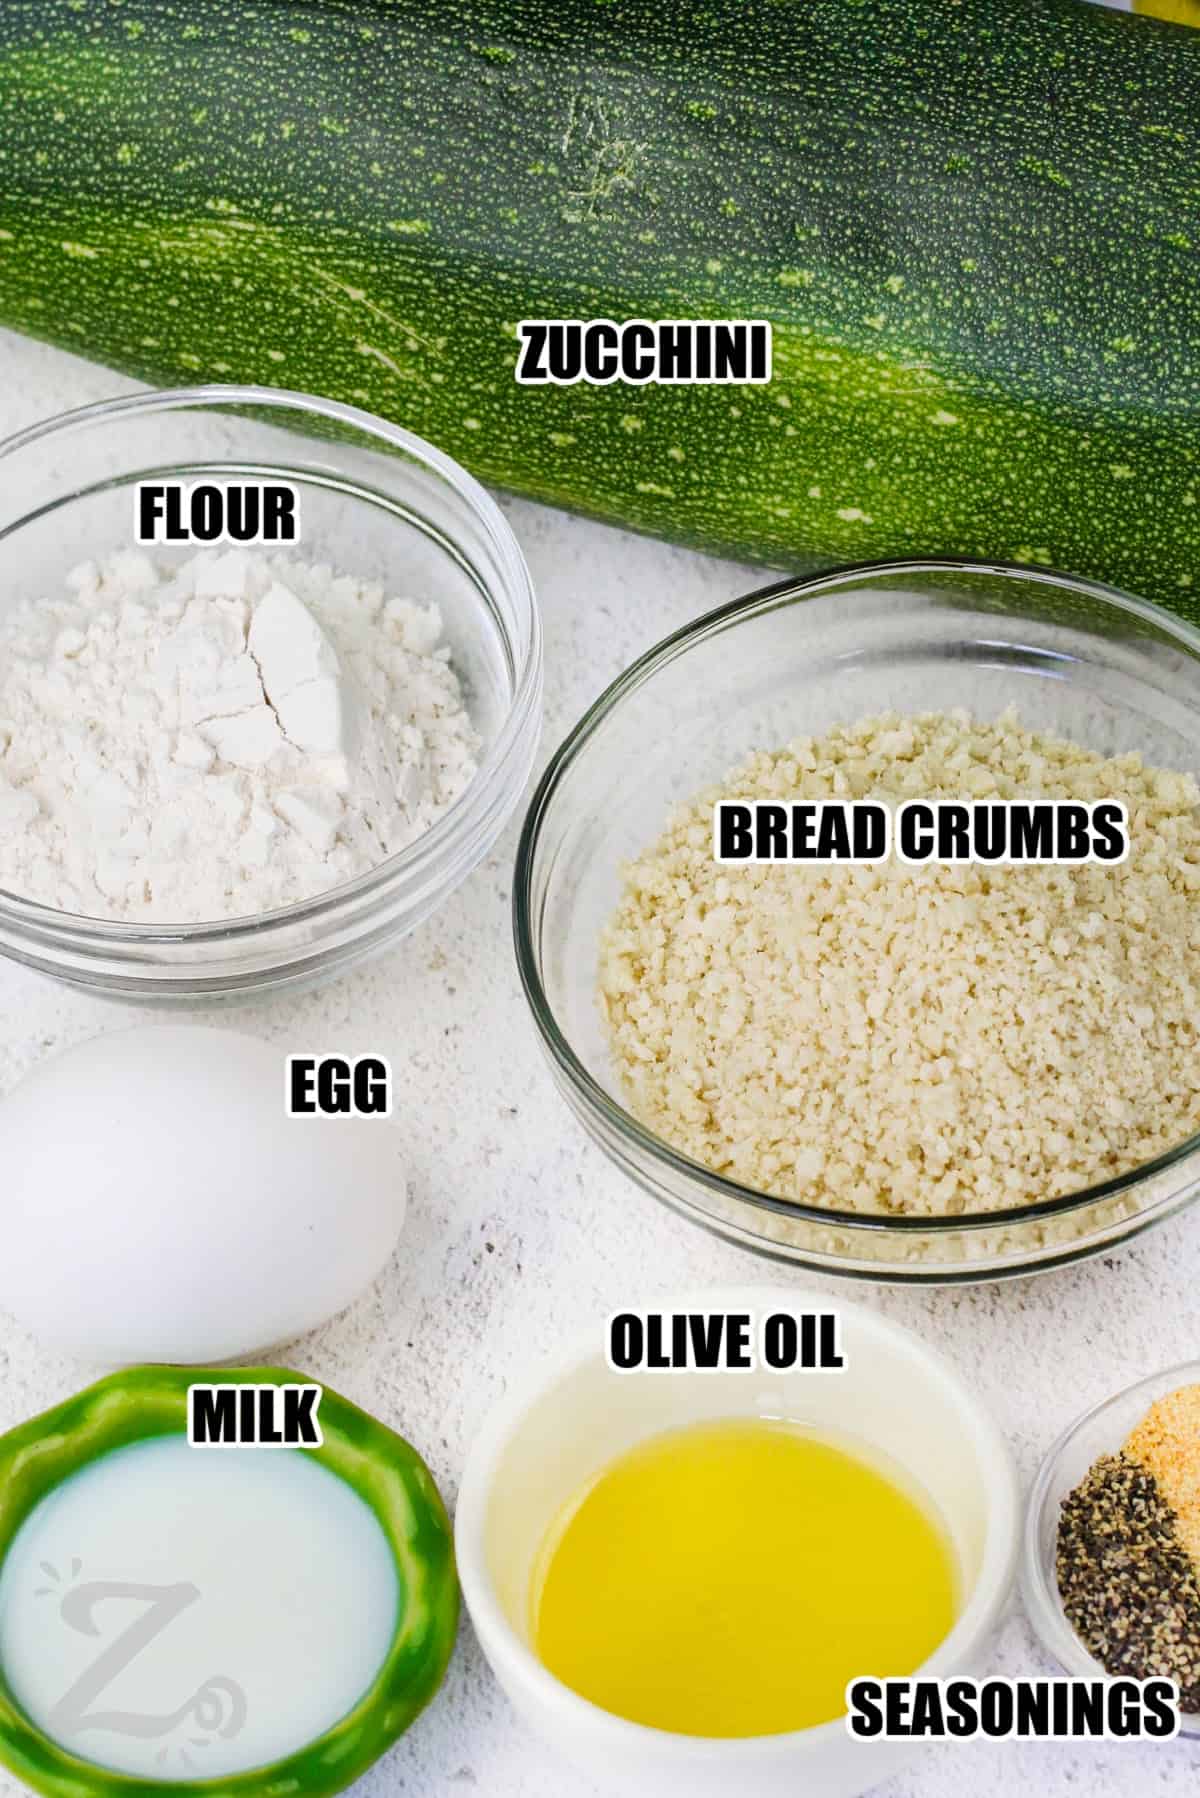 ingredients to make zucchini sticks labeled: zucchini, flour, bread crumbs, egg, milk, oilive oil and seasonings